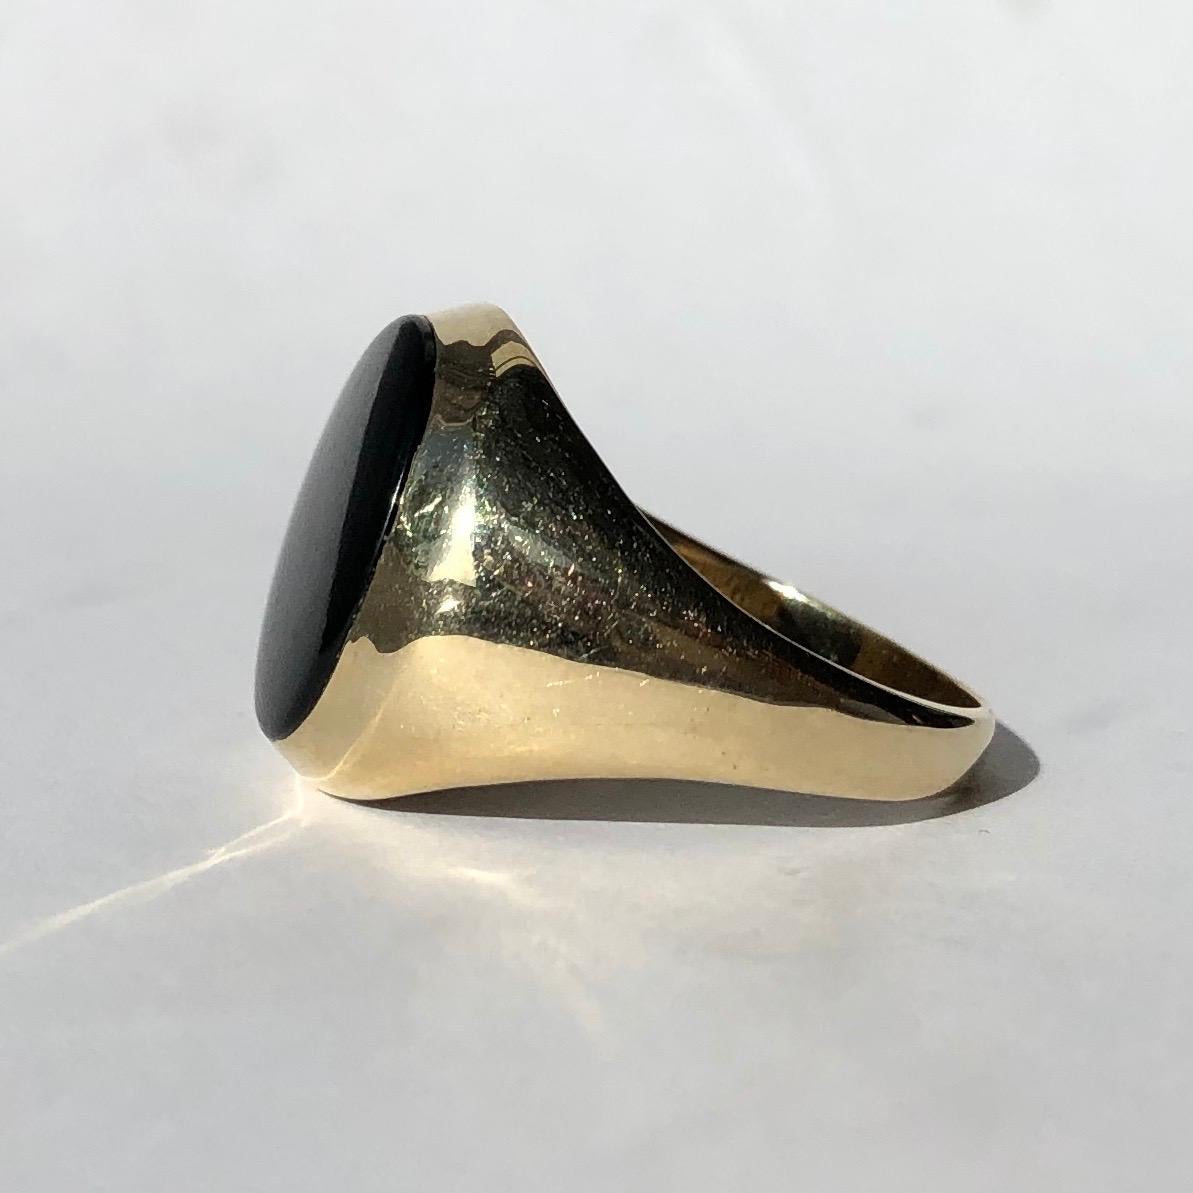 The onyx in this signet ring is in lovely condition and it so glossy! The stone is set within the 9ct gold band and this piece was made in Chester, England. 

Ring Size: Q or 8 1/4
Stone Dimensions: 12x14mm 

Weight: 3.91g